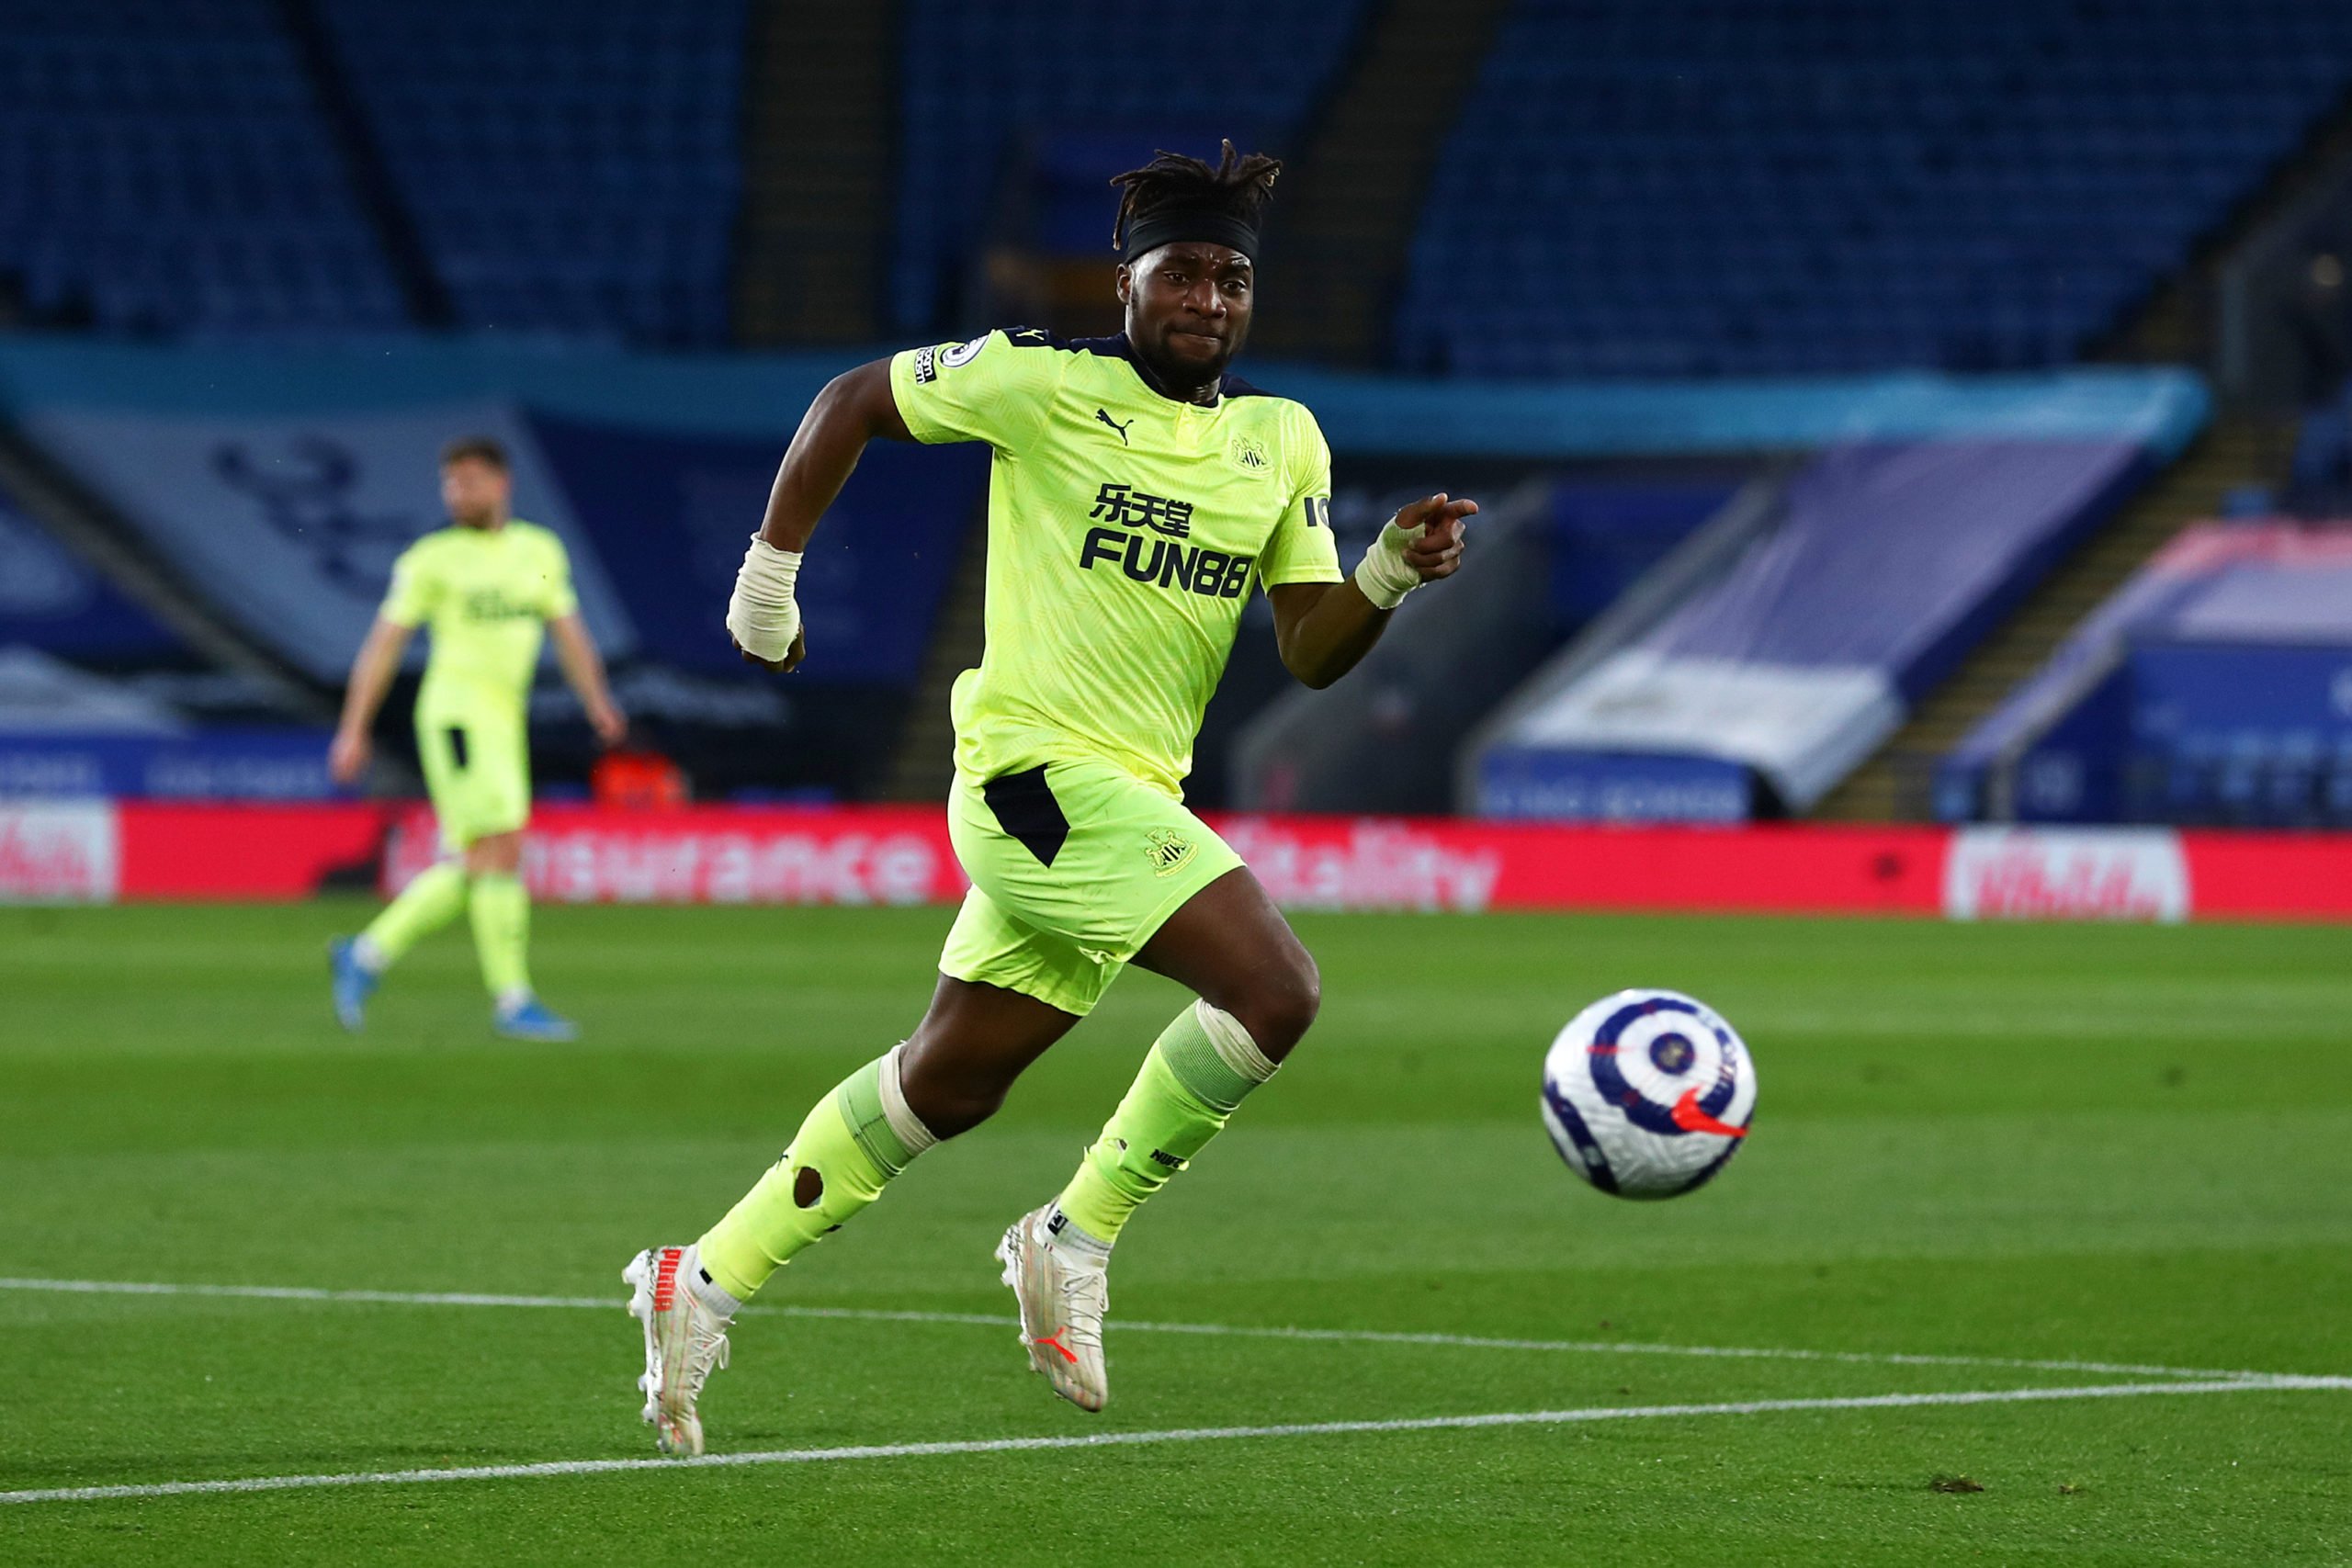 Steve Bruce rules out Newcastle United selling Allan Saint-Maximin this summer